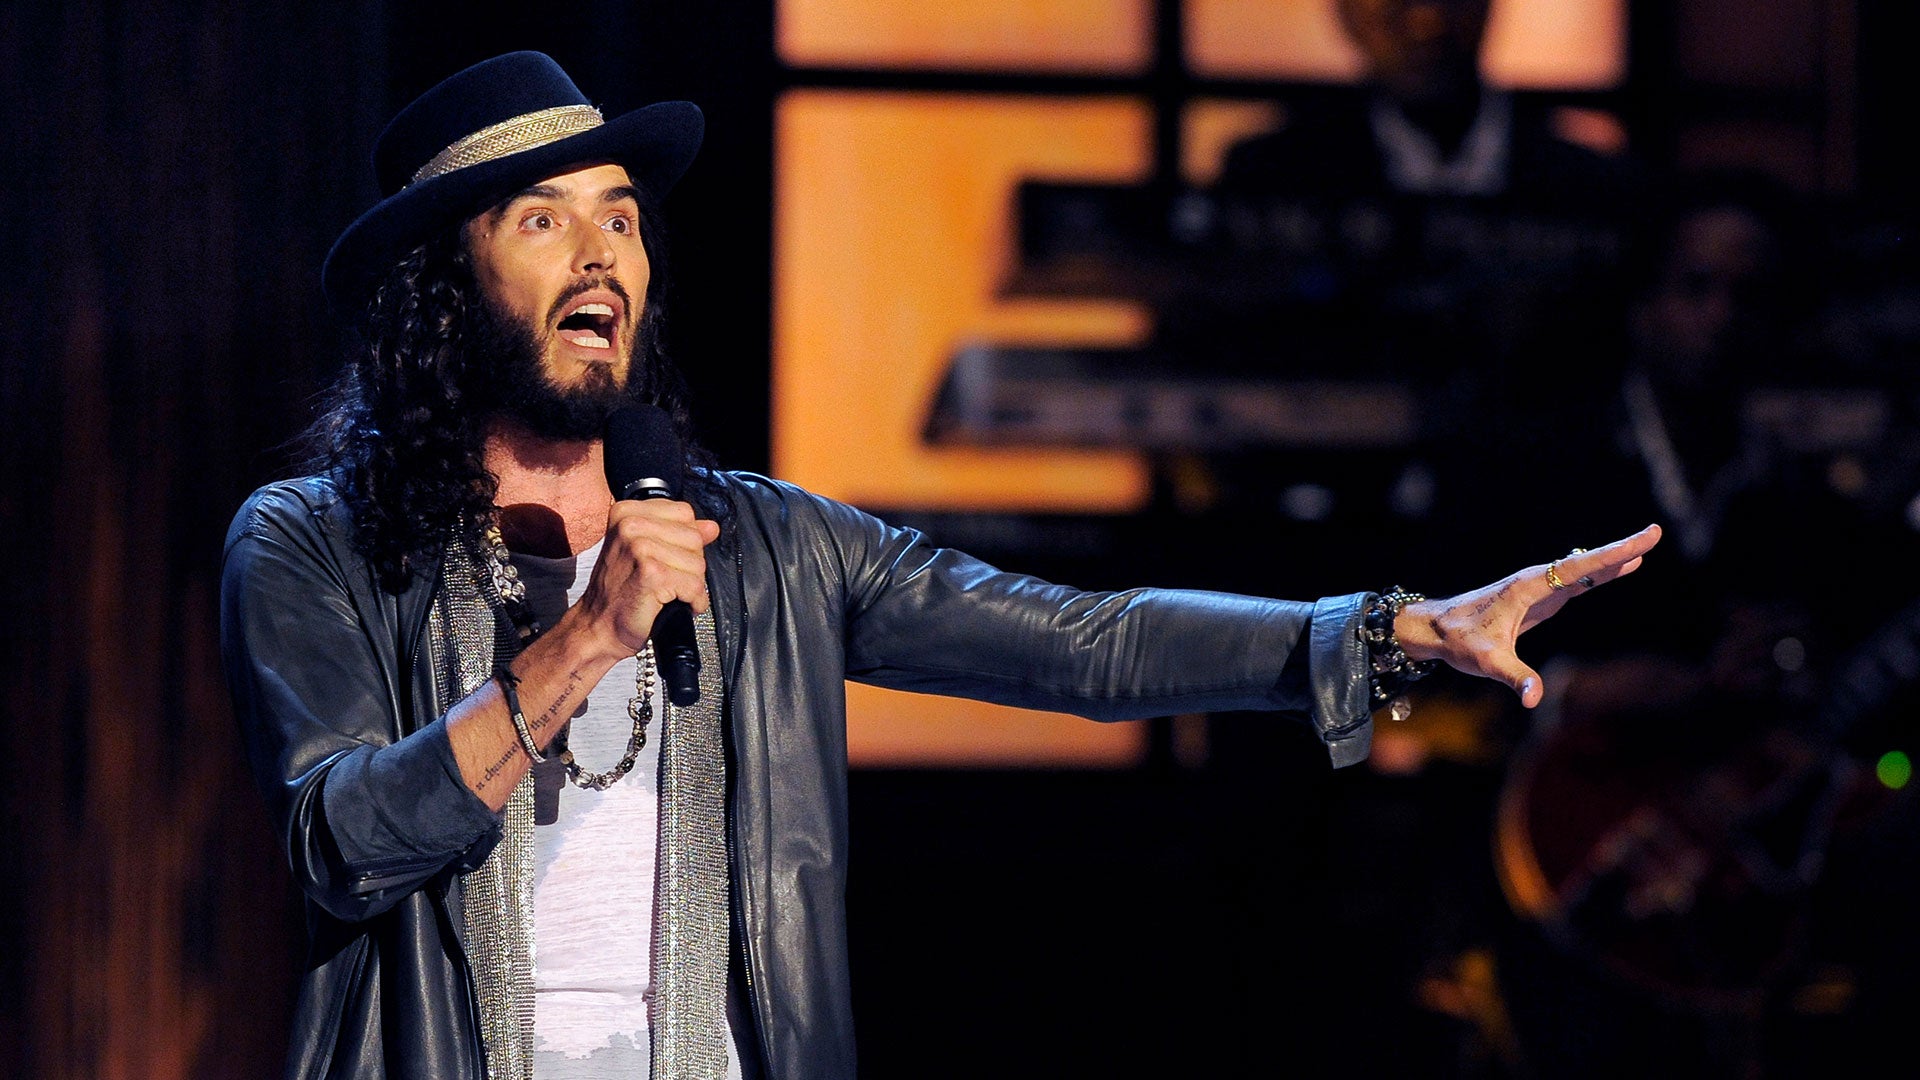 ANALYSIS Only God Knows Russell Brand's Heart, but Baptism and Syncretism Aren't Compatible